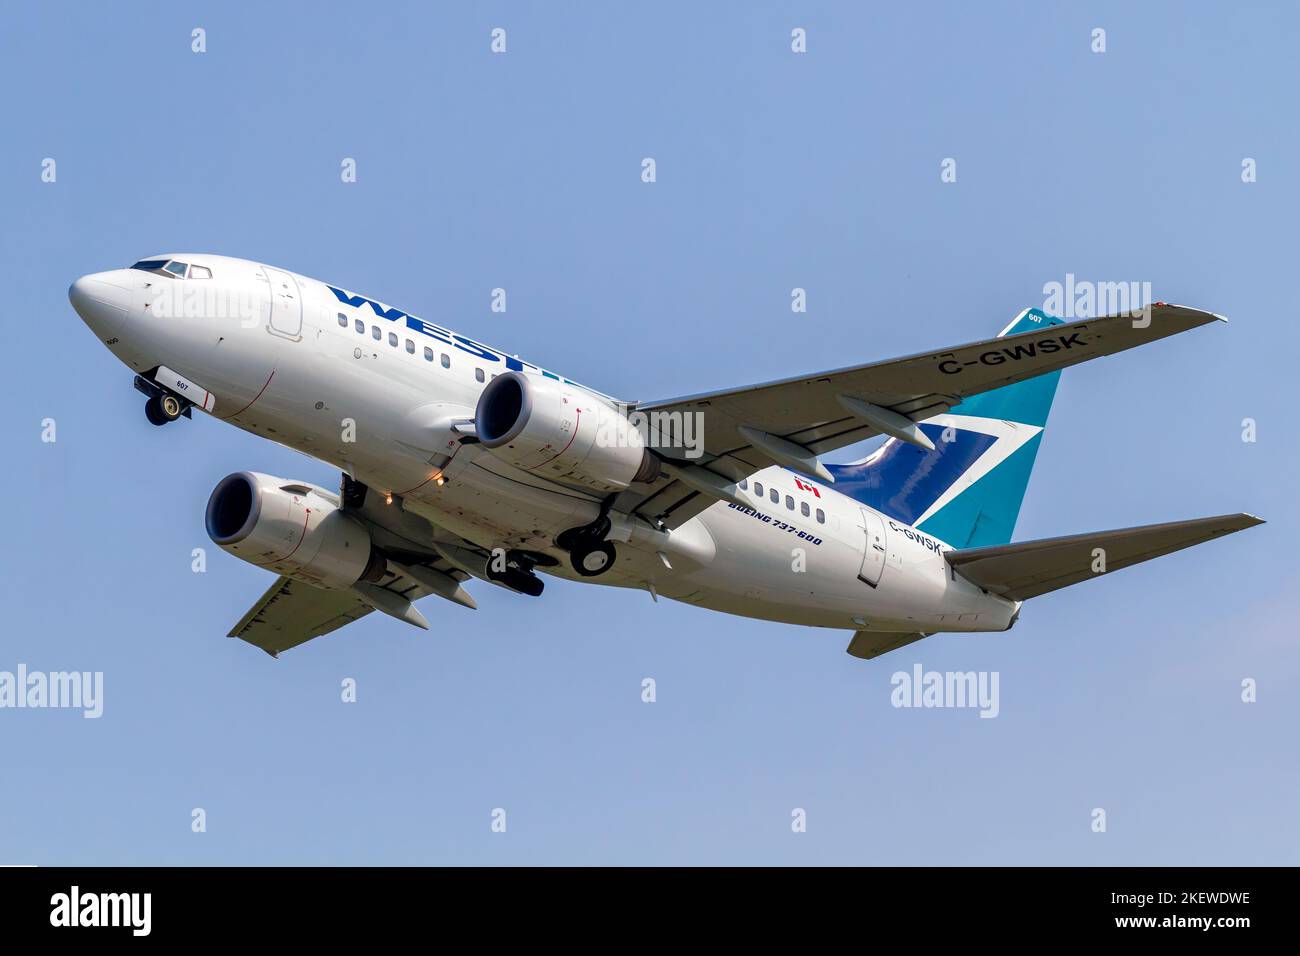 A WestJet 737-600 commercial passenger airliner shortly after take off from the London International Airport in London, Ontario, Canada. Stock Photo